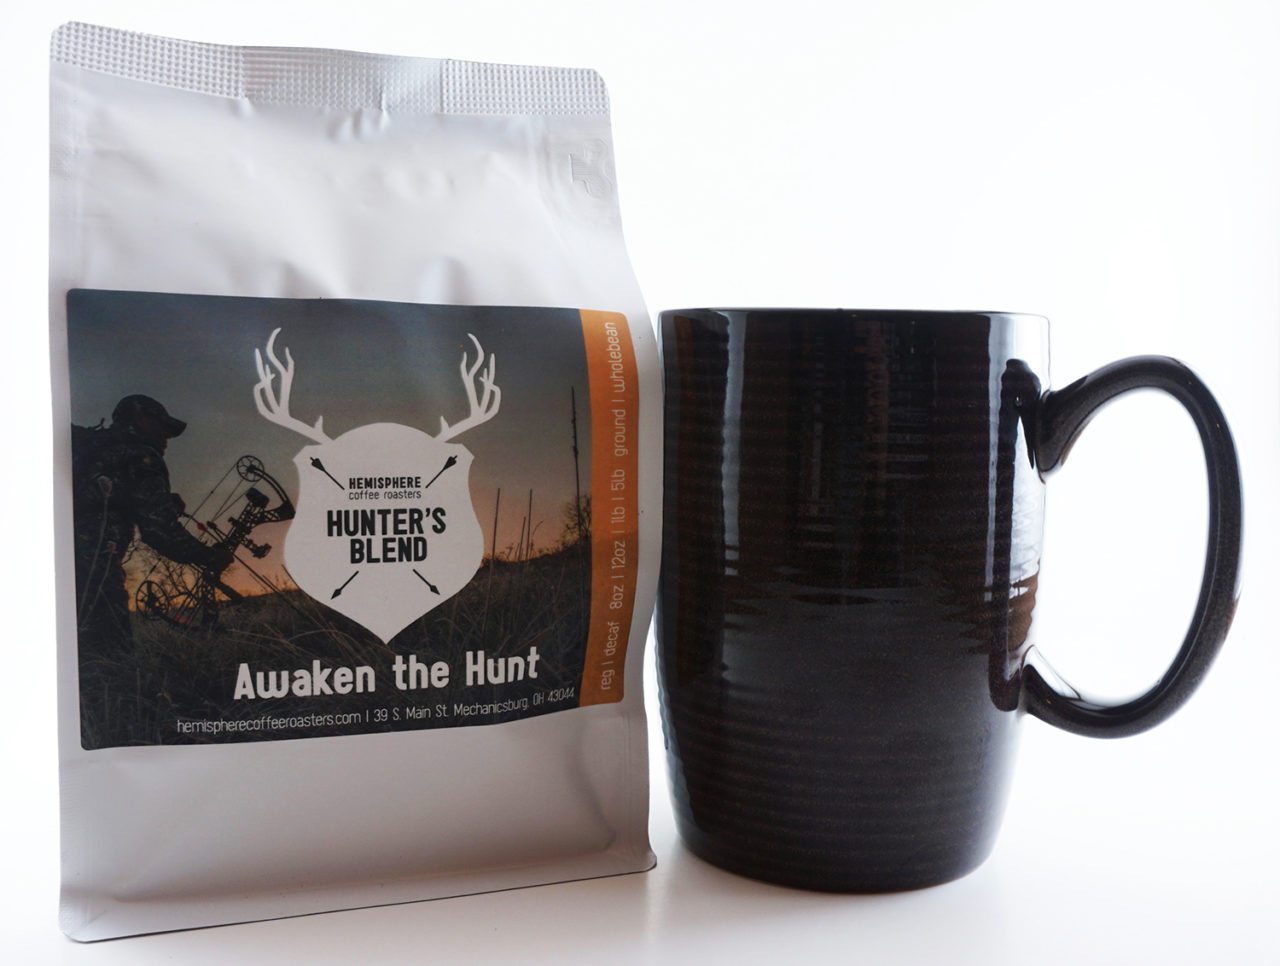 HEMISPHERE COFFEE ROASTERS™ ‘WAKES UP’ HUNTING MARKET WITH NEW LINE OF HUNTER’S BLEND COFFEE